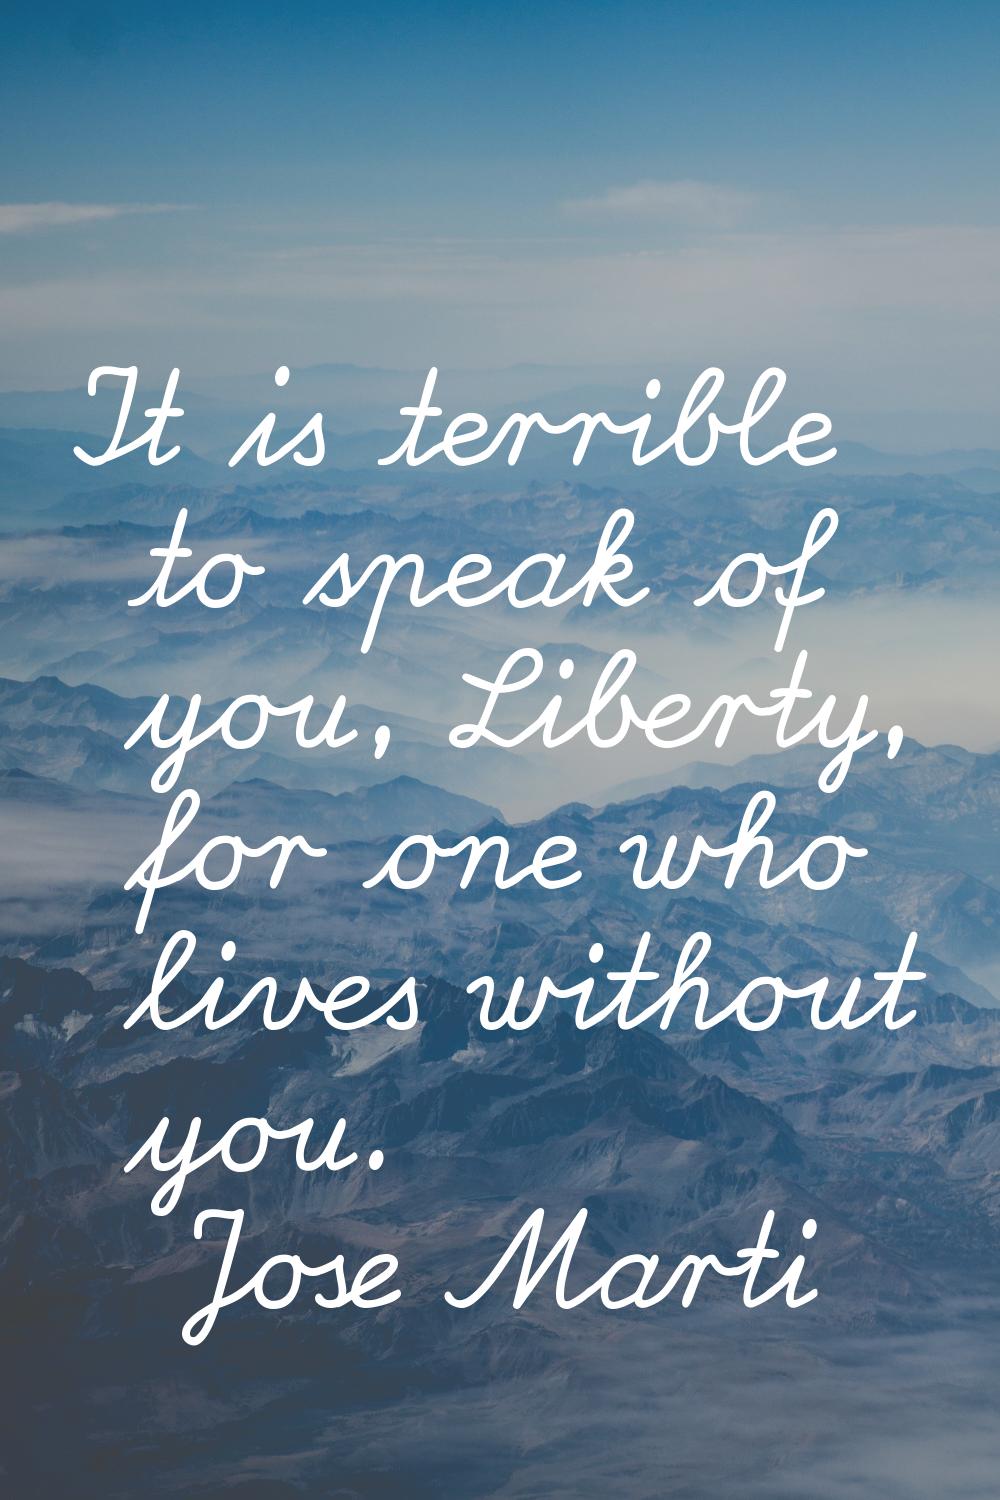 It is terrible to speak of you, Liberty, for one who lives without you.